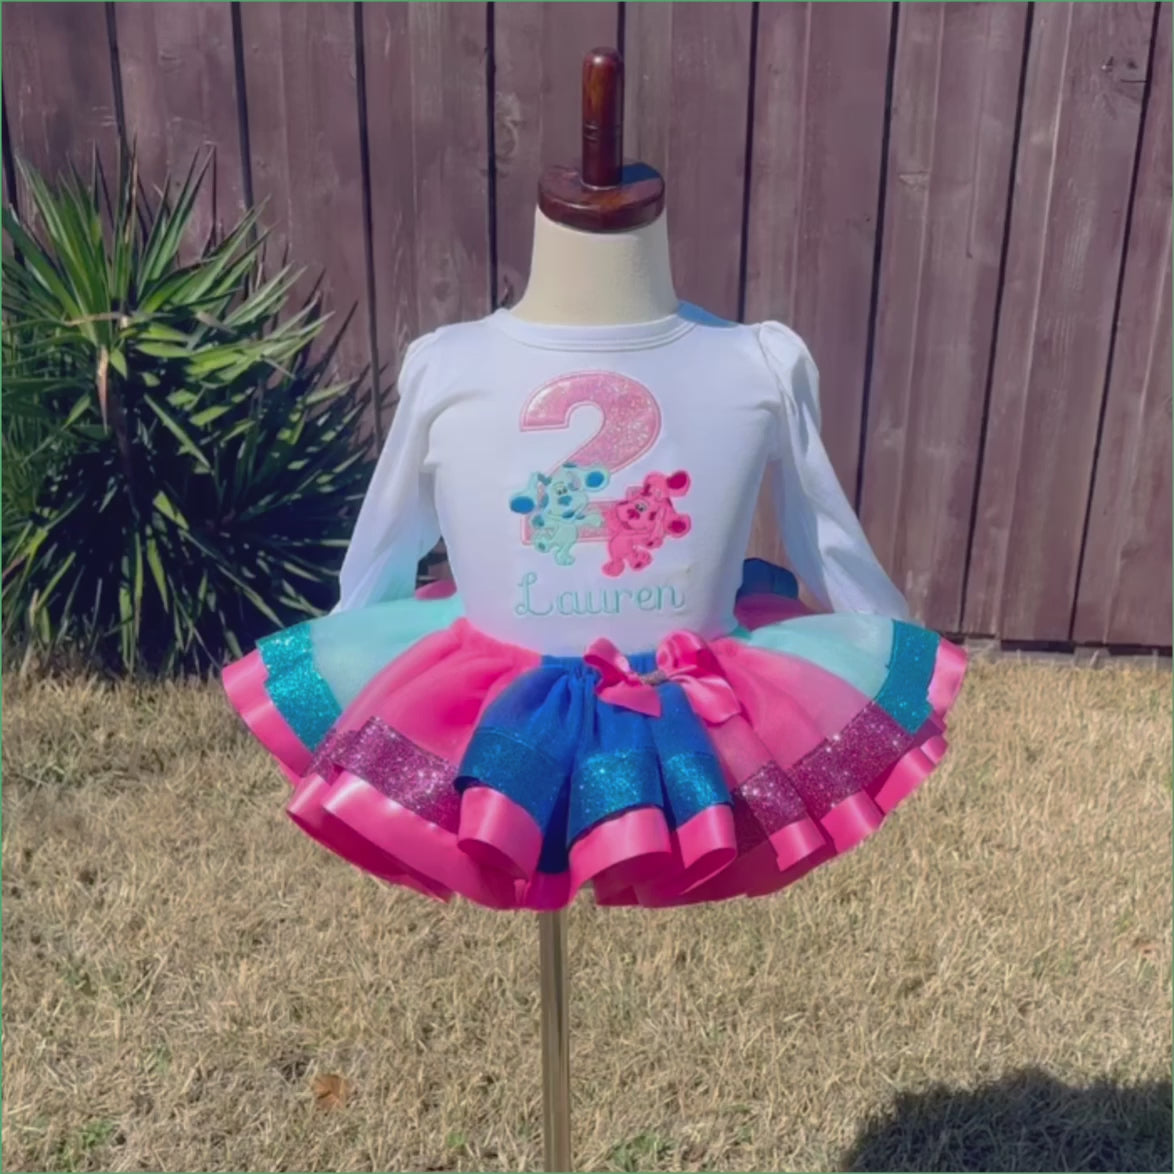 Blues Clues Girl Birthday Outfit Pink Blue  |Blues Clues Tutu Set Pink | Blues Clues Party Dress